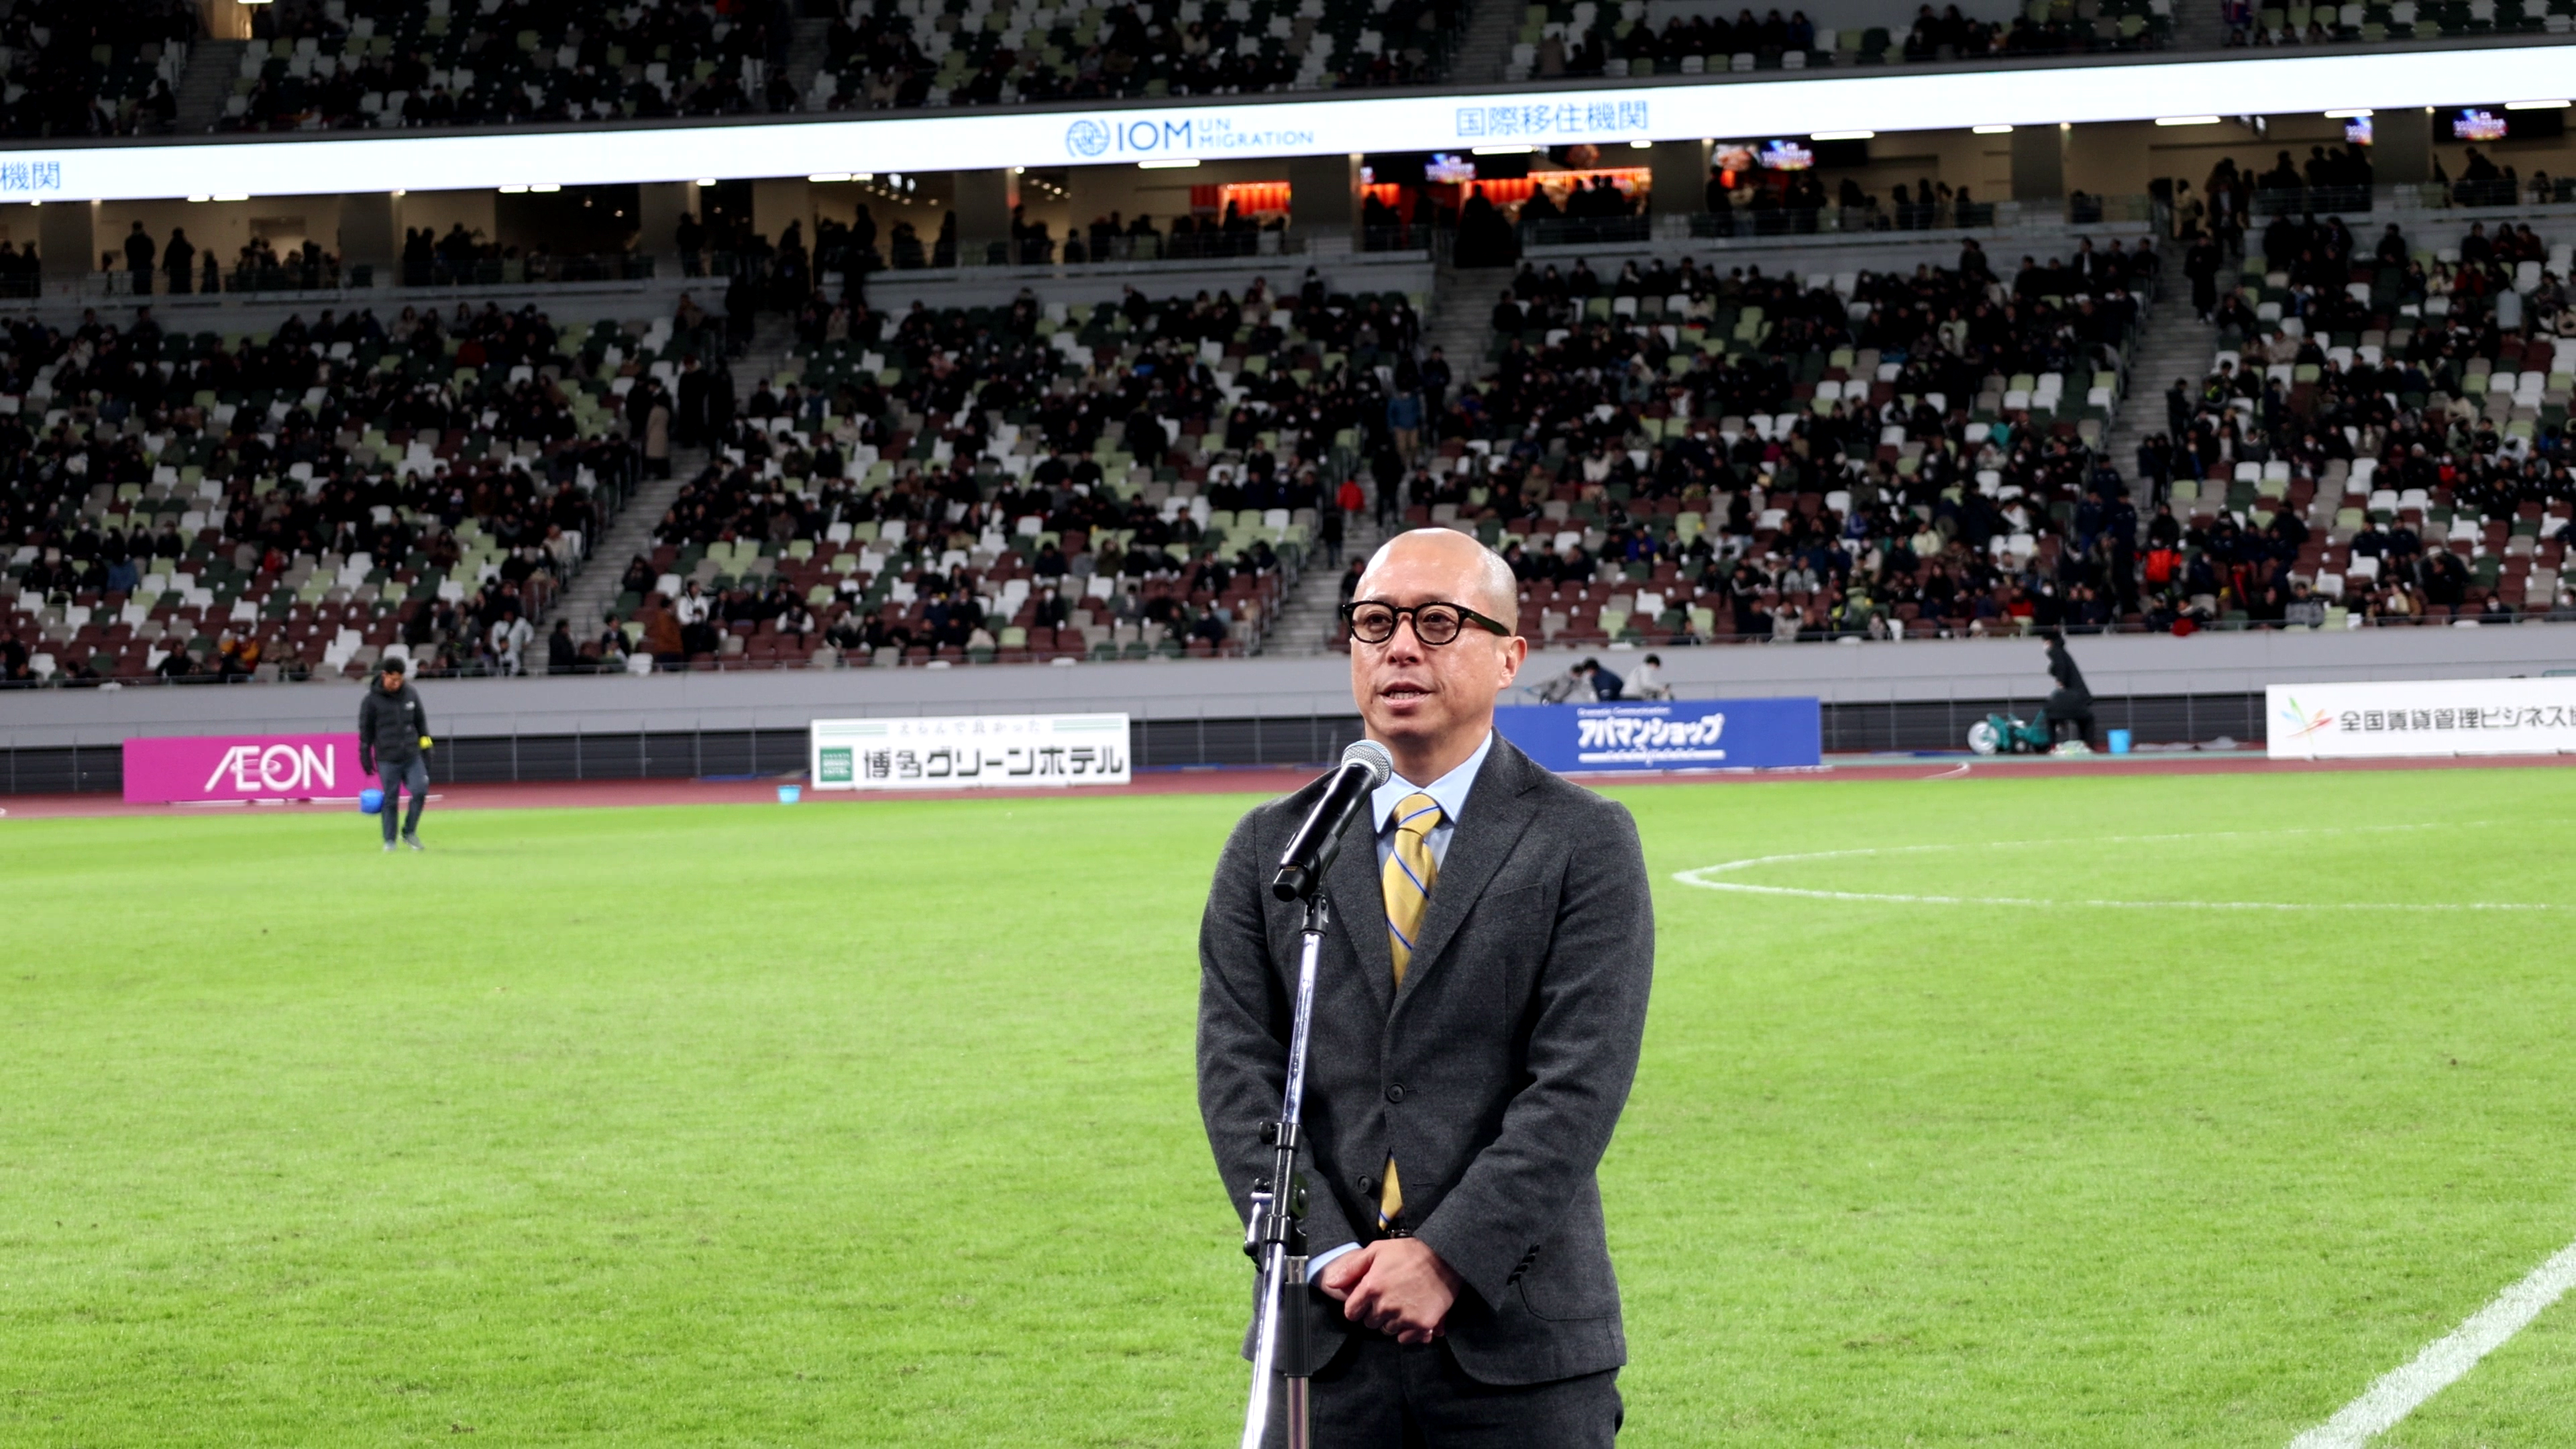 Daihei Mochizuki, IOM Chief of Mission in Japan giving a speech during the match